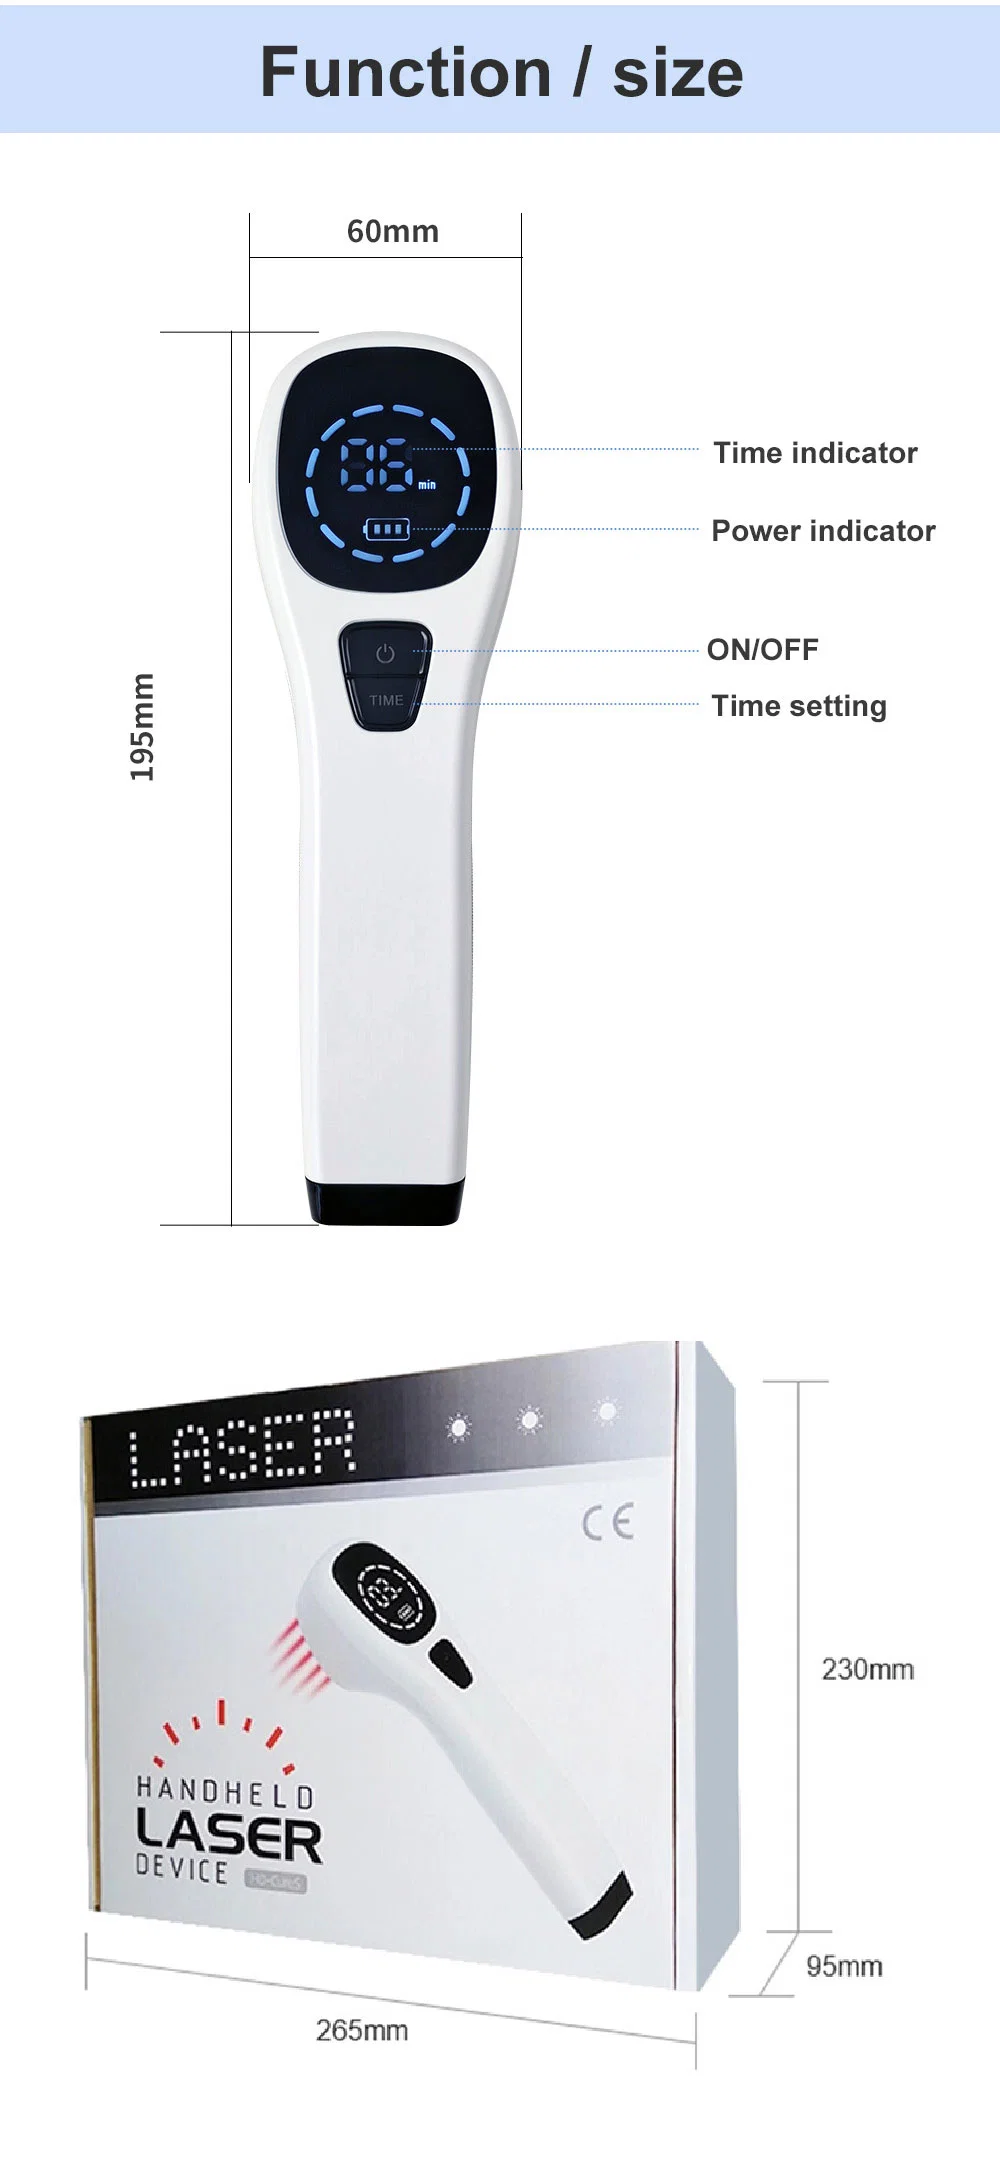 Low Level Laser Light Therapy Pain Management Handpiece Device